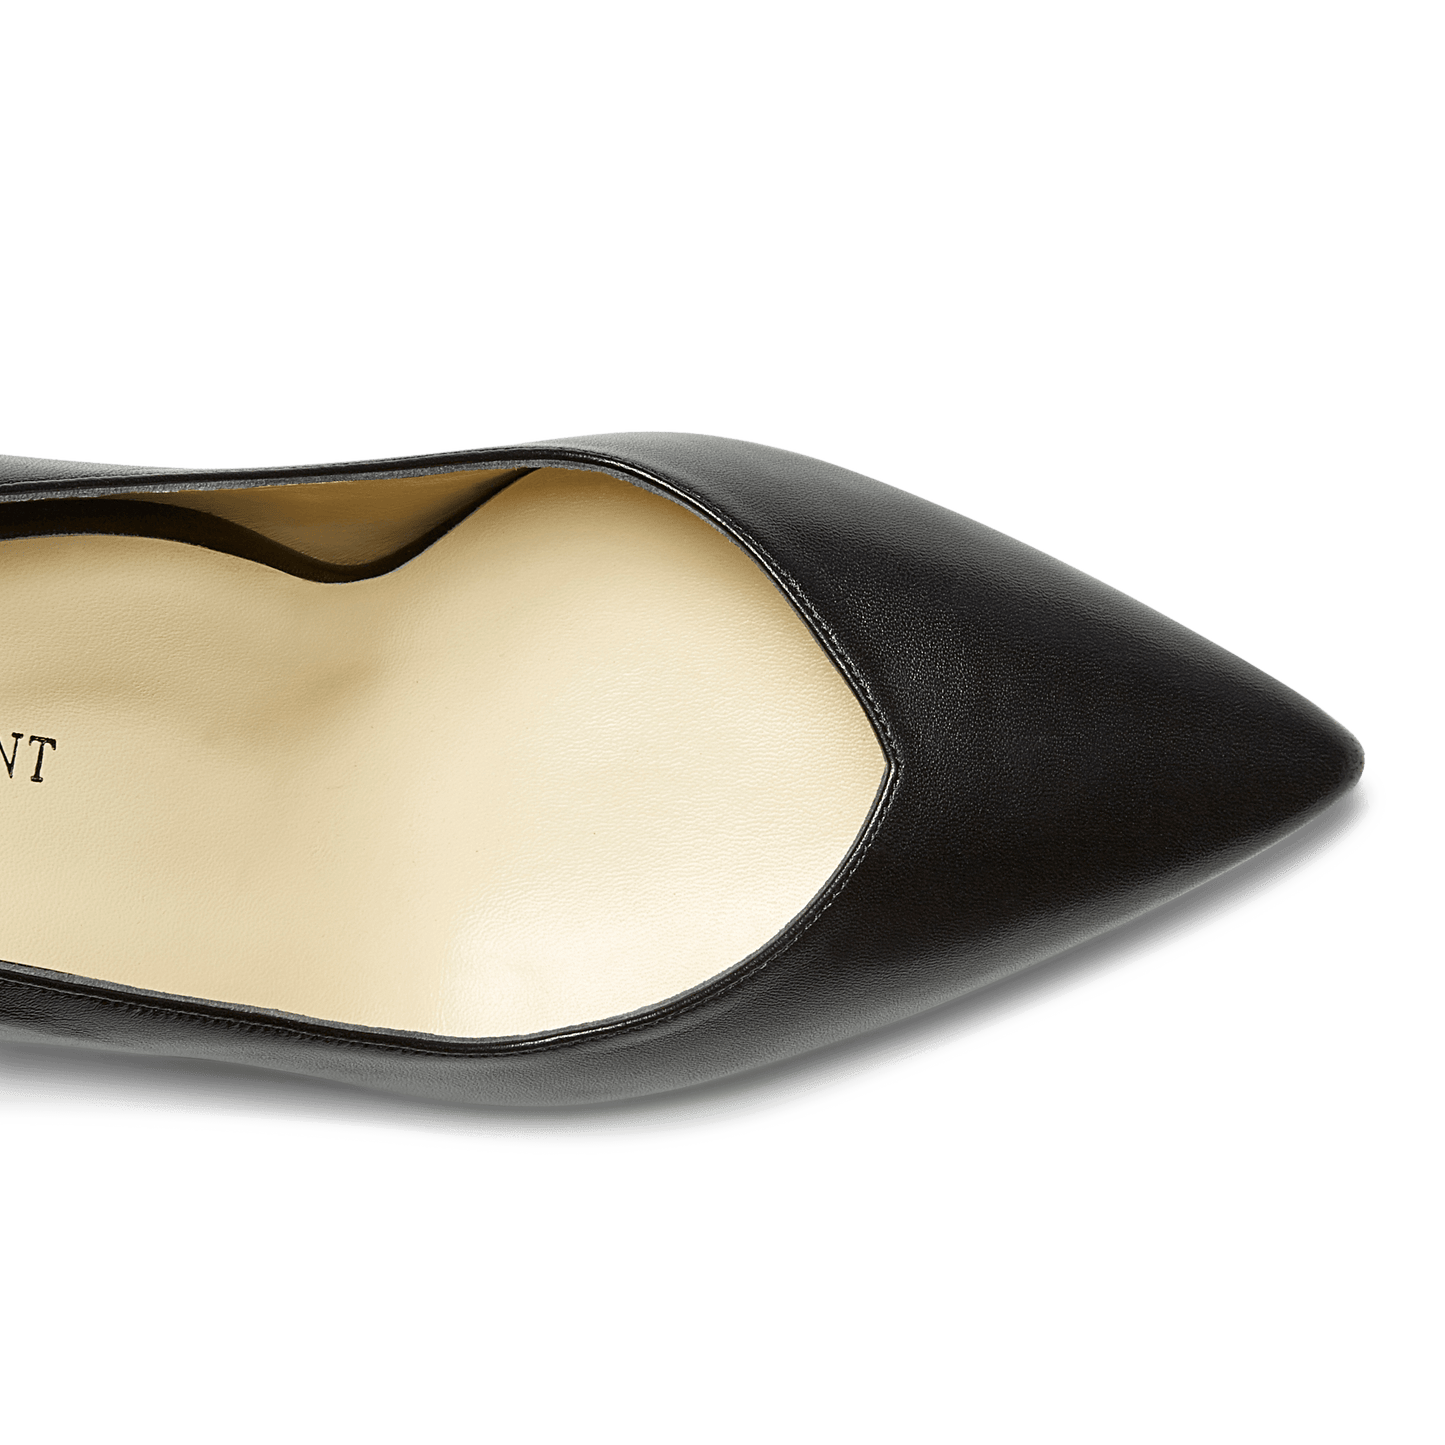 50mm Italian Made Perfect Pointed Toe Pump in Black Calf